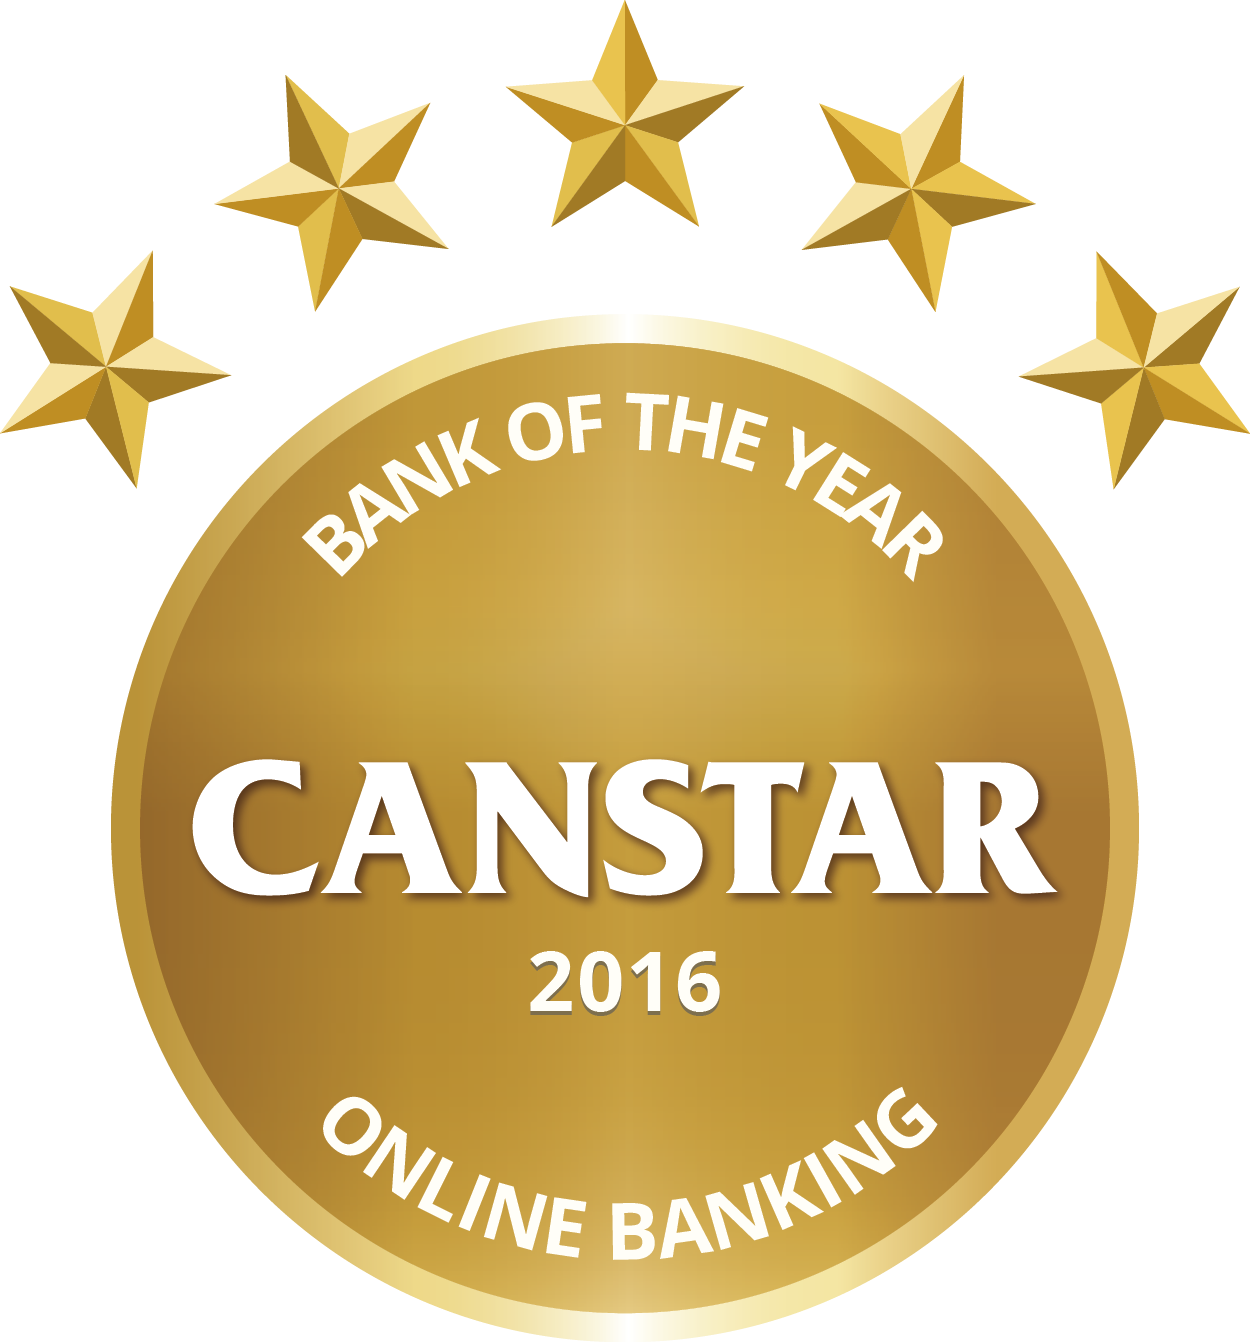 CANSTAR 2016 – Bank of the Year  – Online Banking